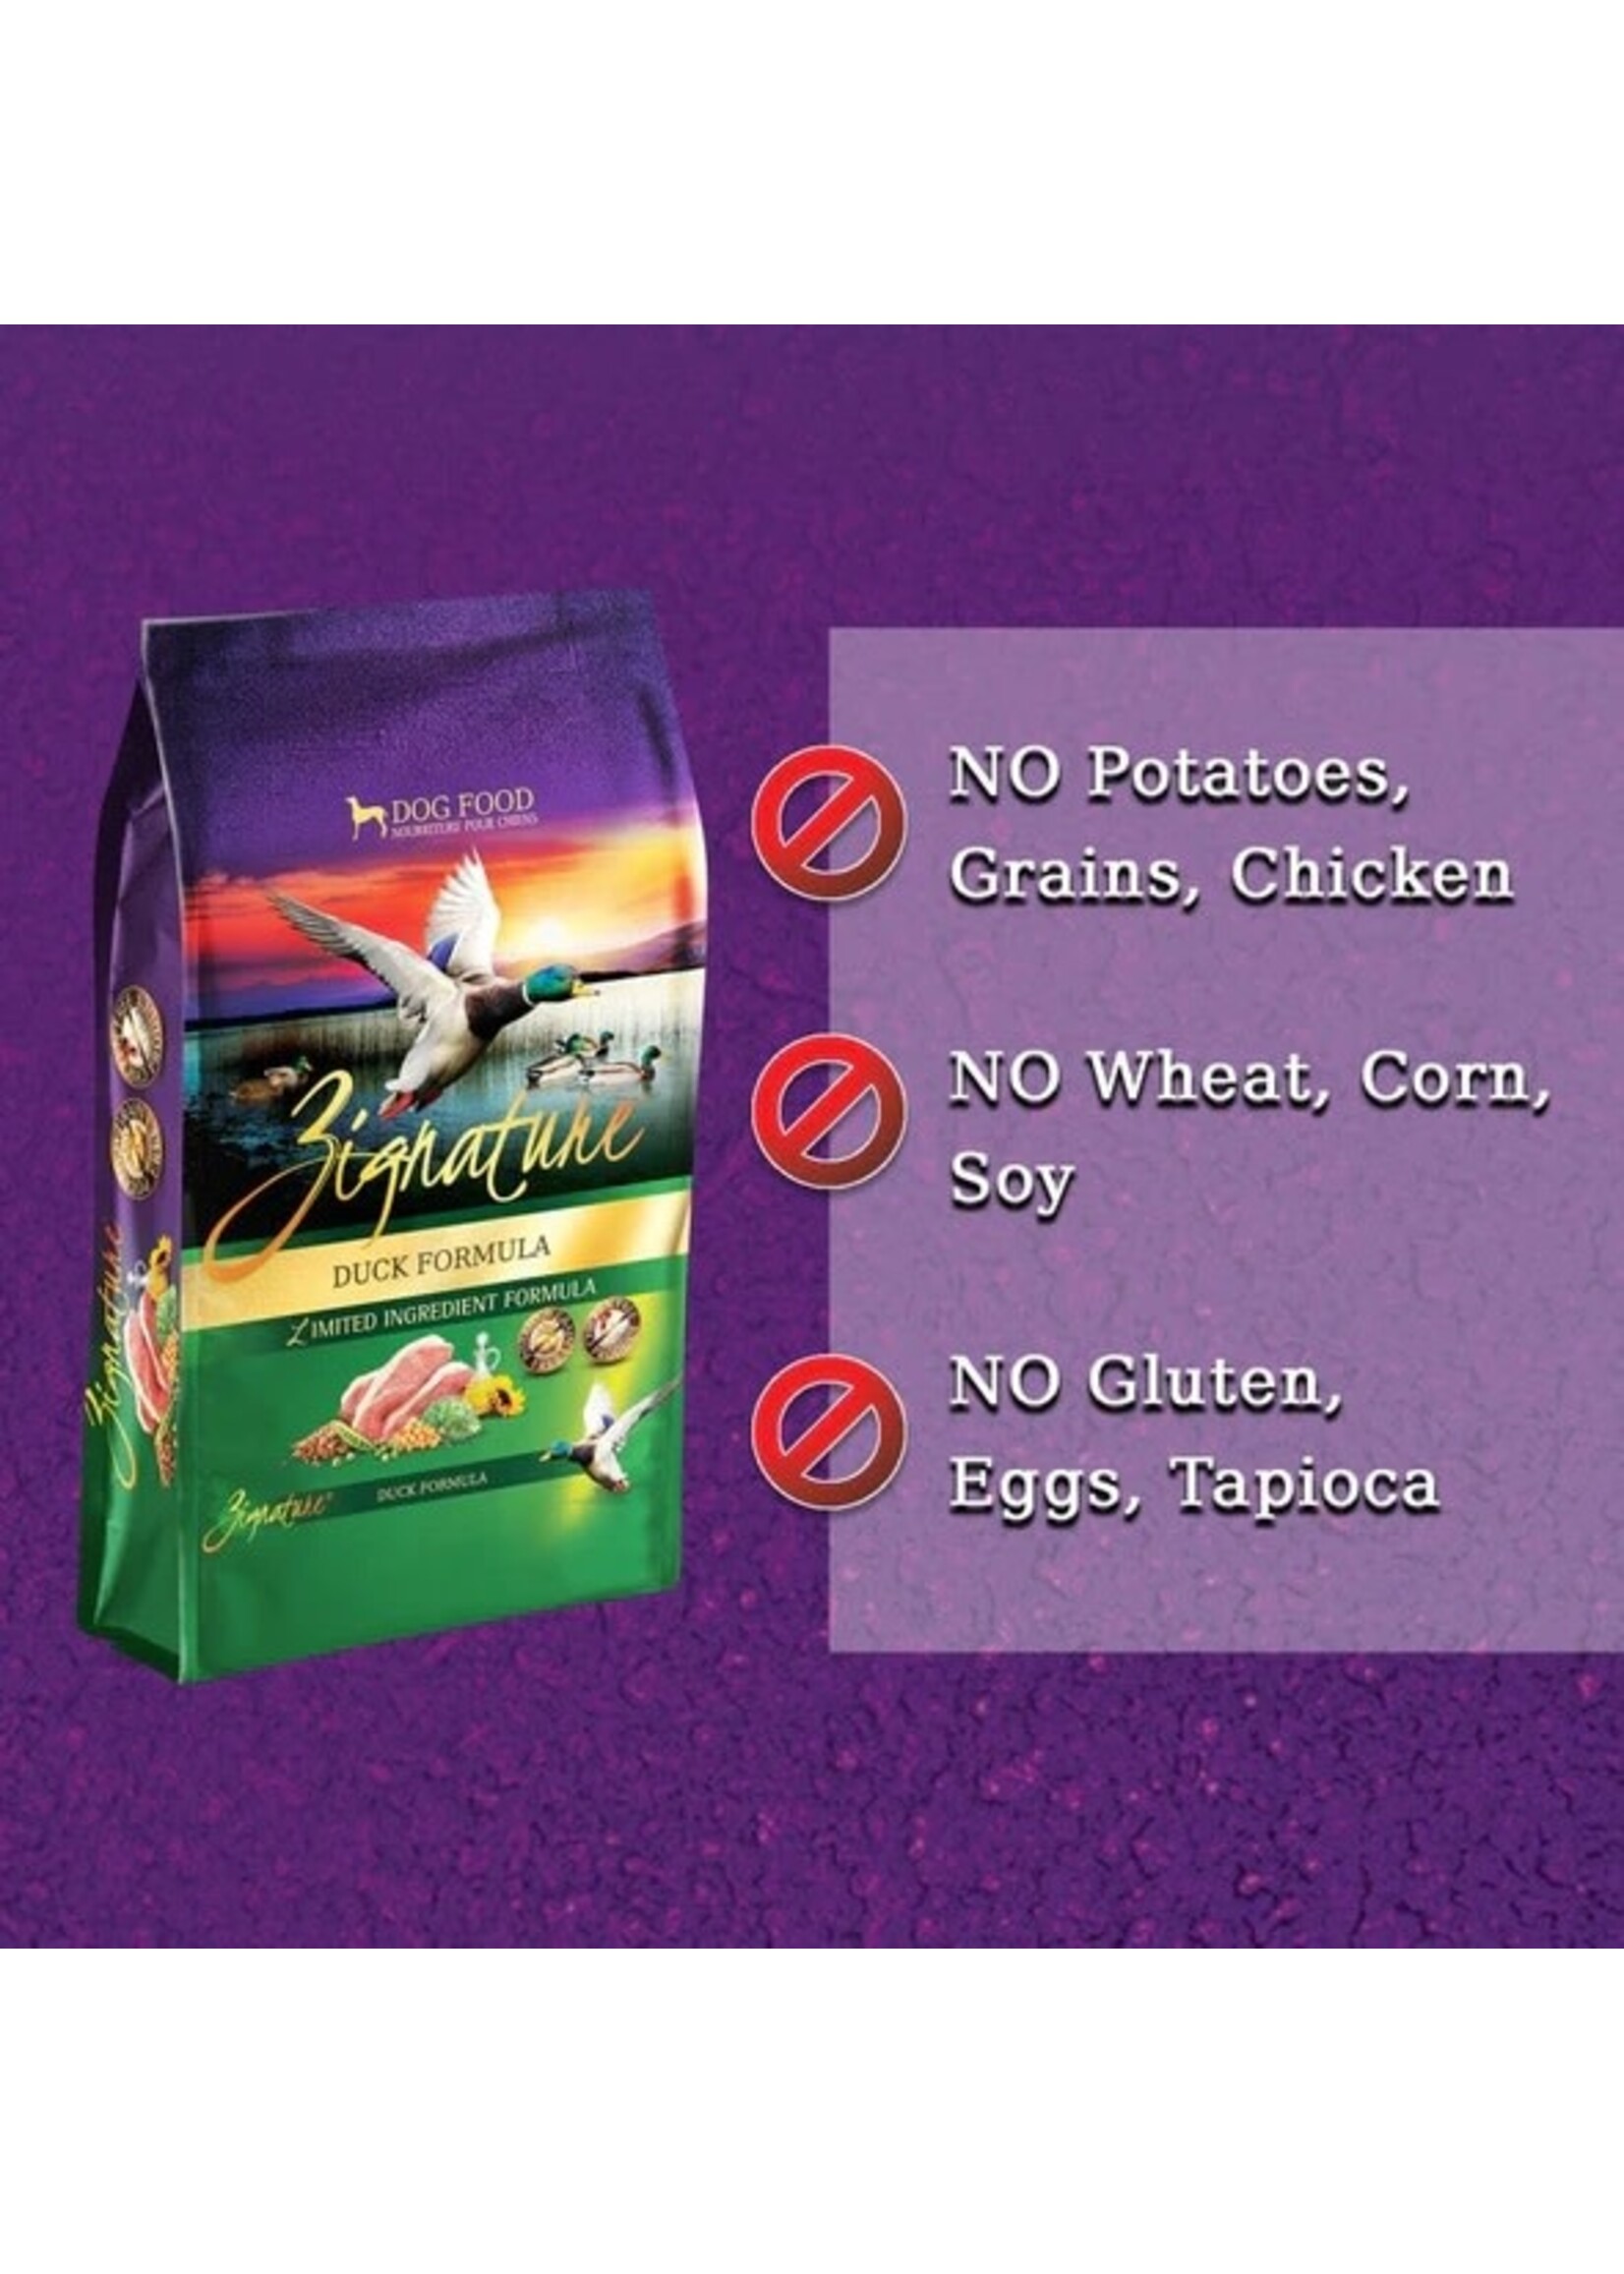 Zignature Duck Formula with Probiotics Limited Ingredient Formula Grain Free All Life Stages Dog Food 4 lbs